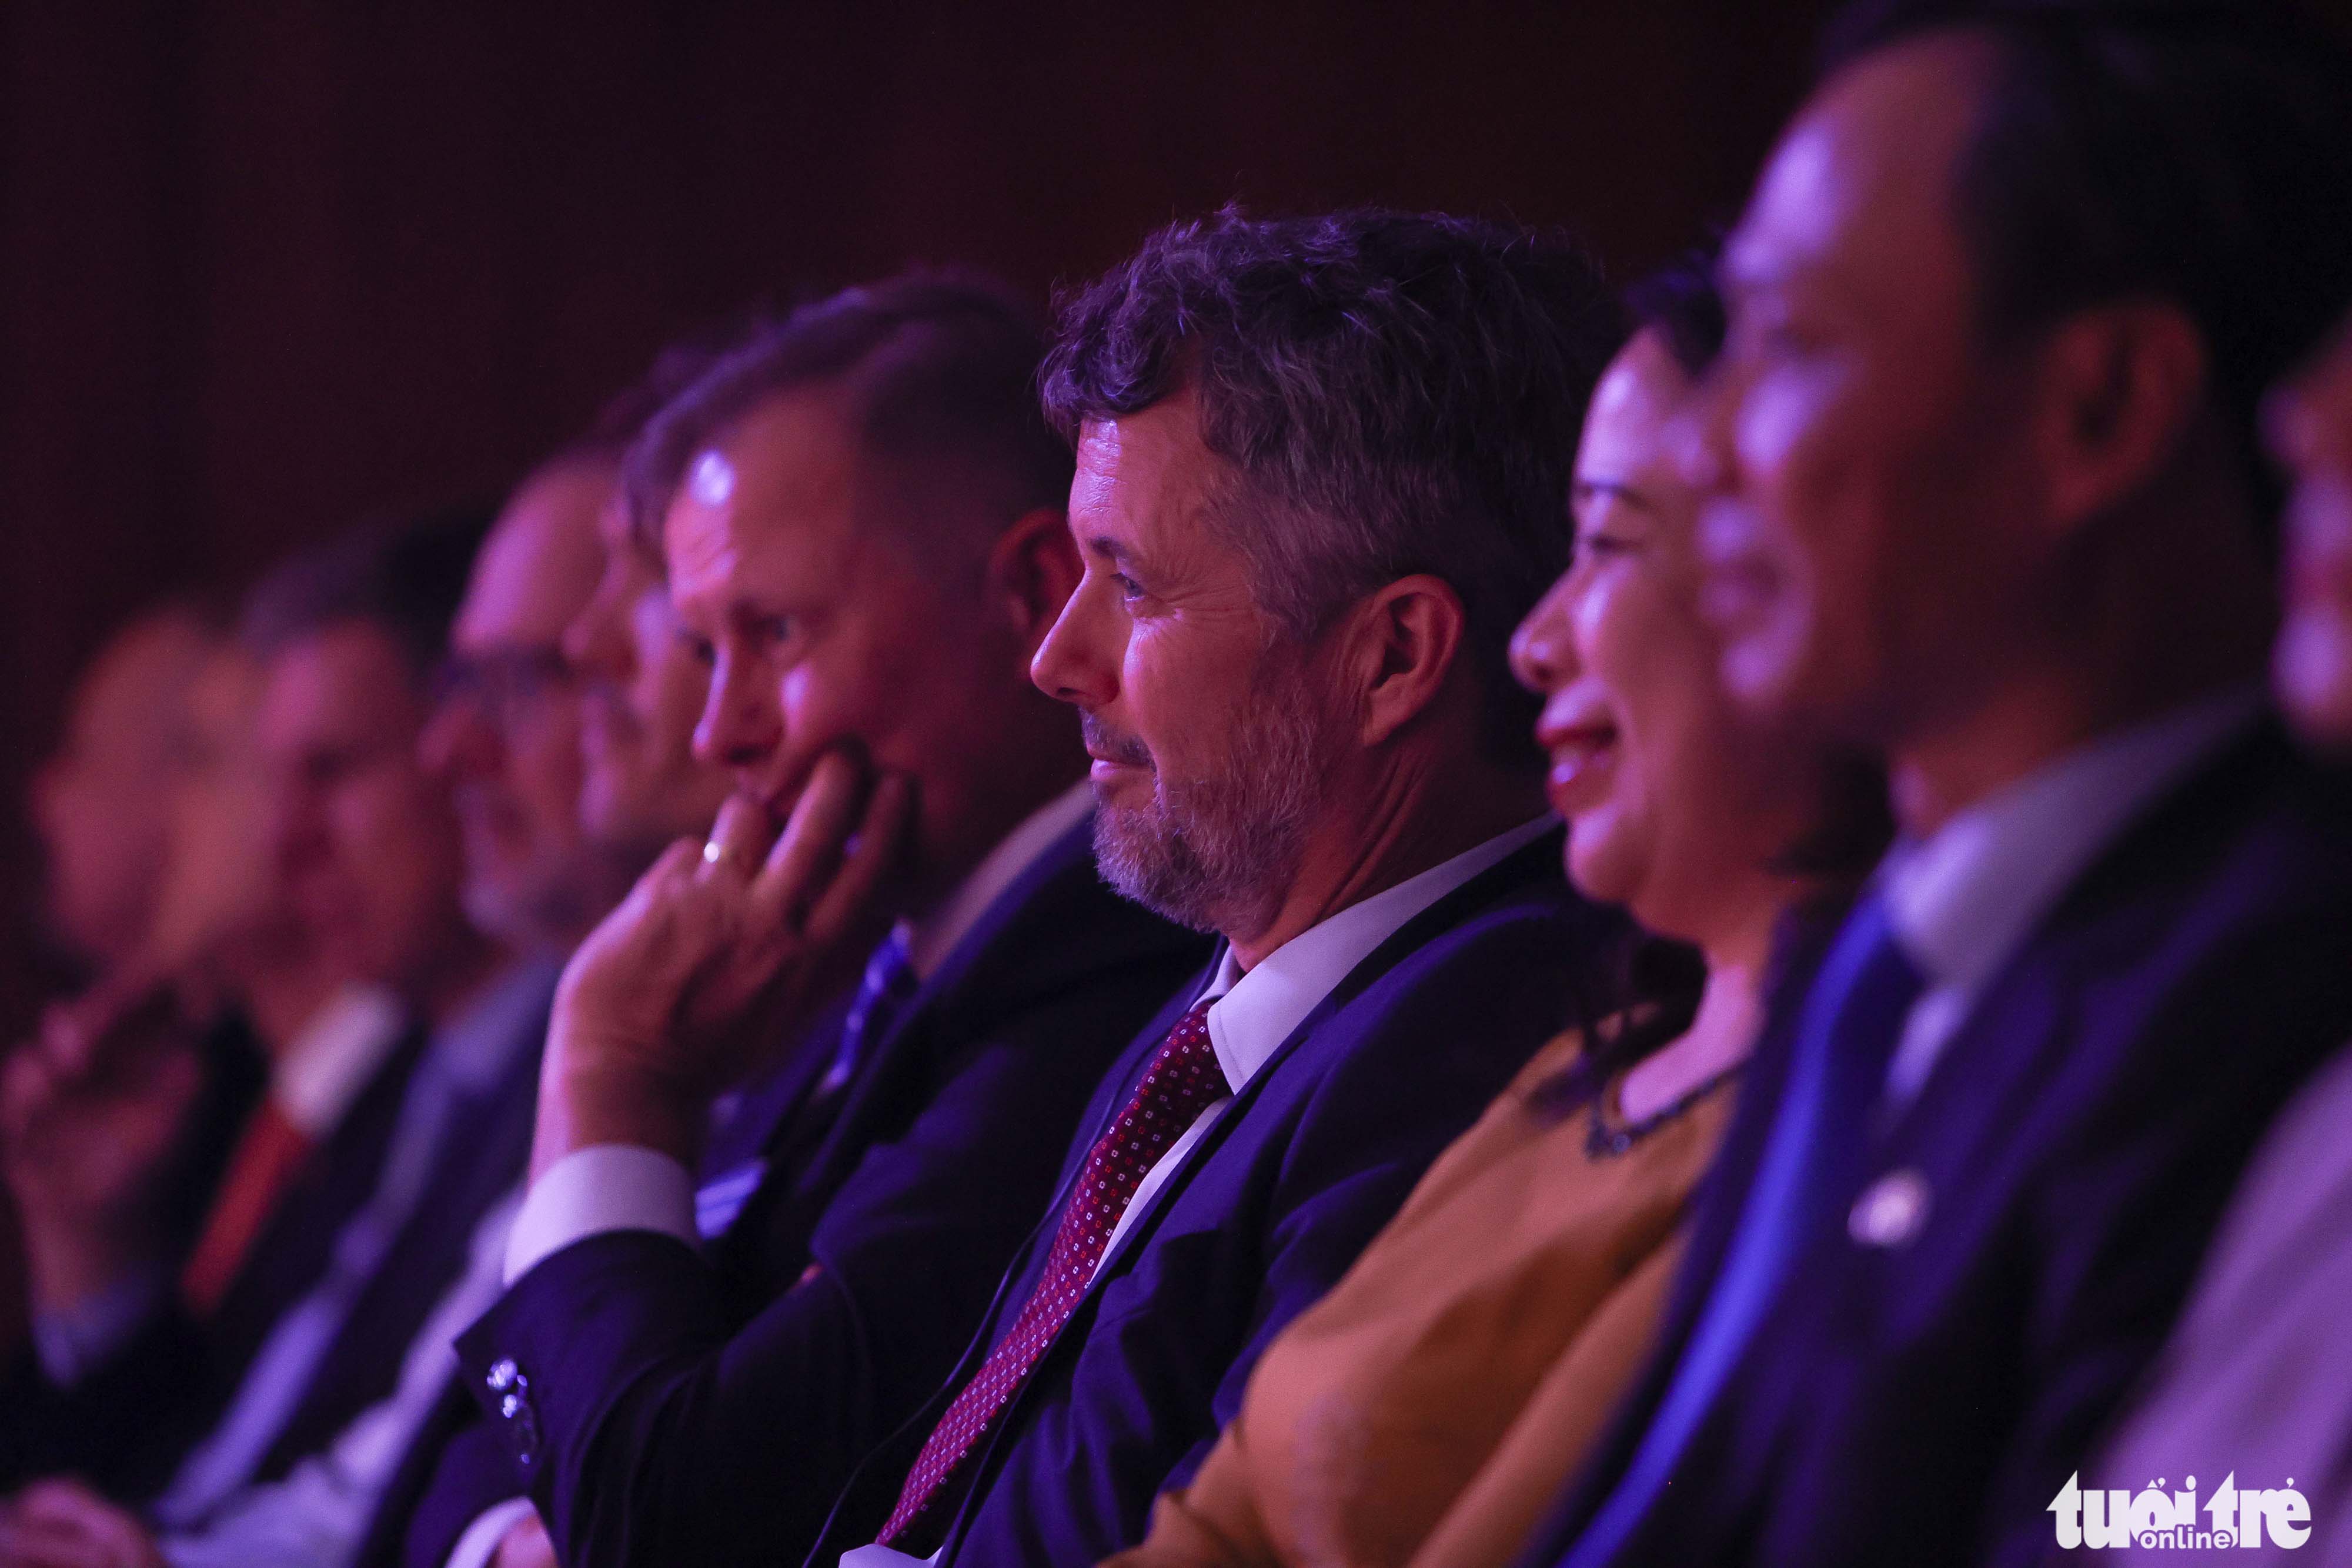 Crown Prince of Denmark Frederik is accompanied by Vietnamese Vice-State President Vo Thi Anh Xuan during the water puppet show in Hanoi, November 1, 2022. Photo: Nguyen Khanh / Tuoi Tre